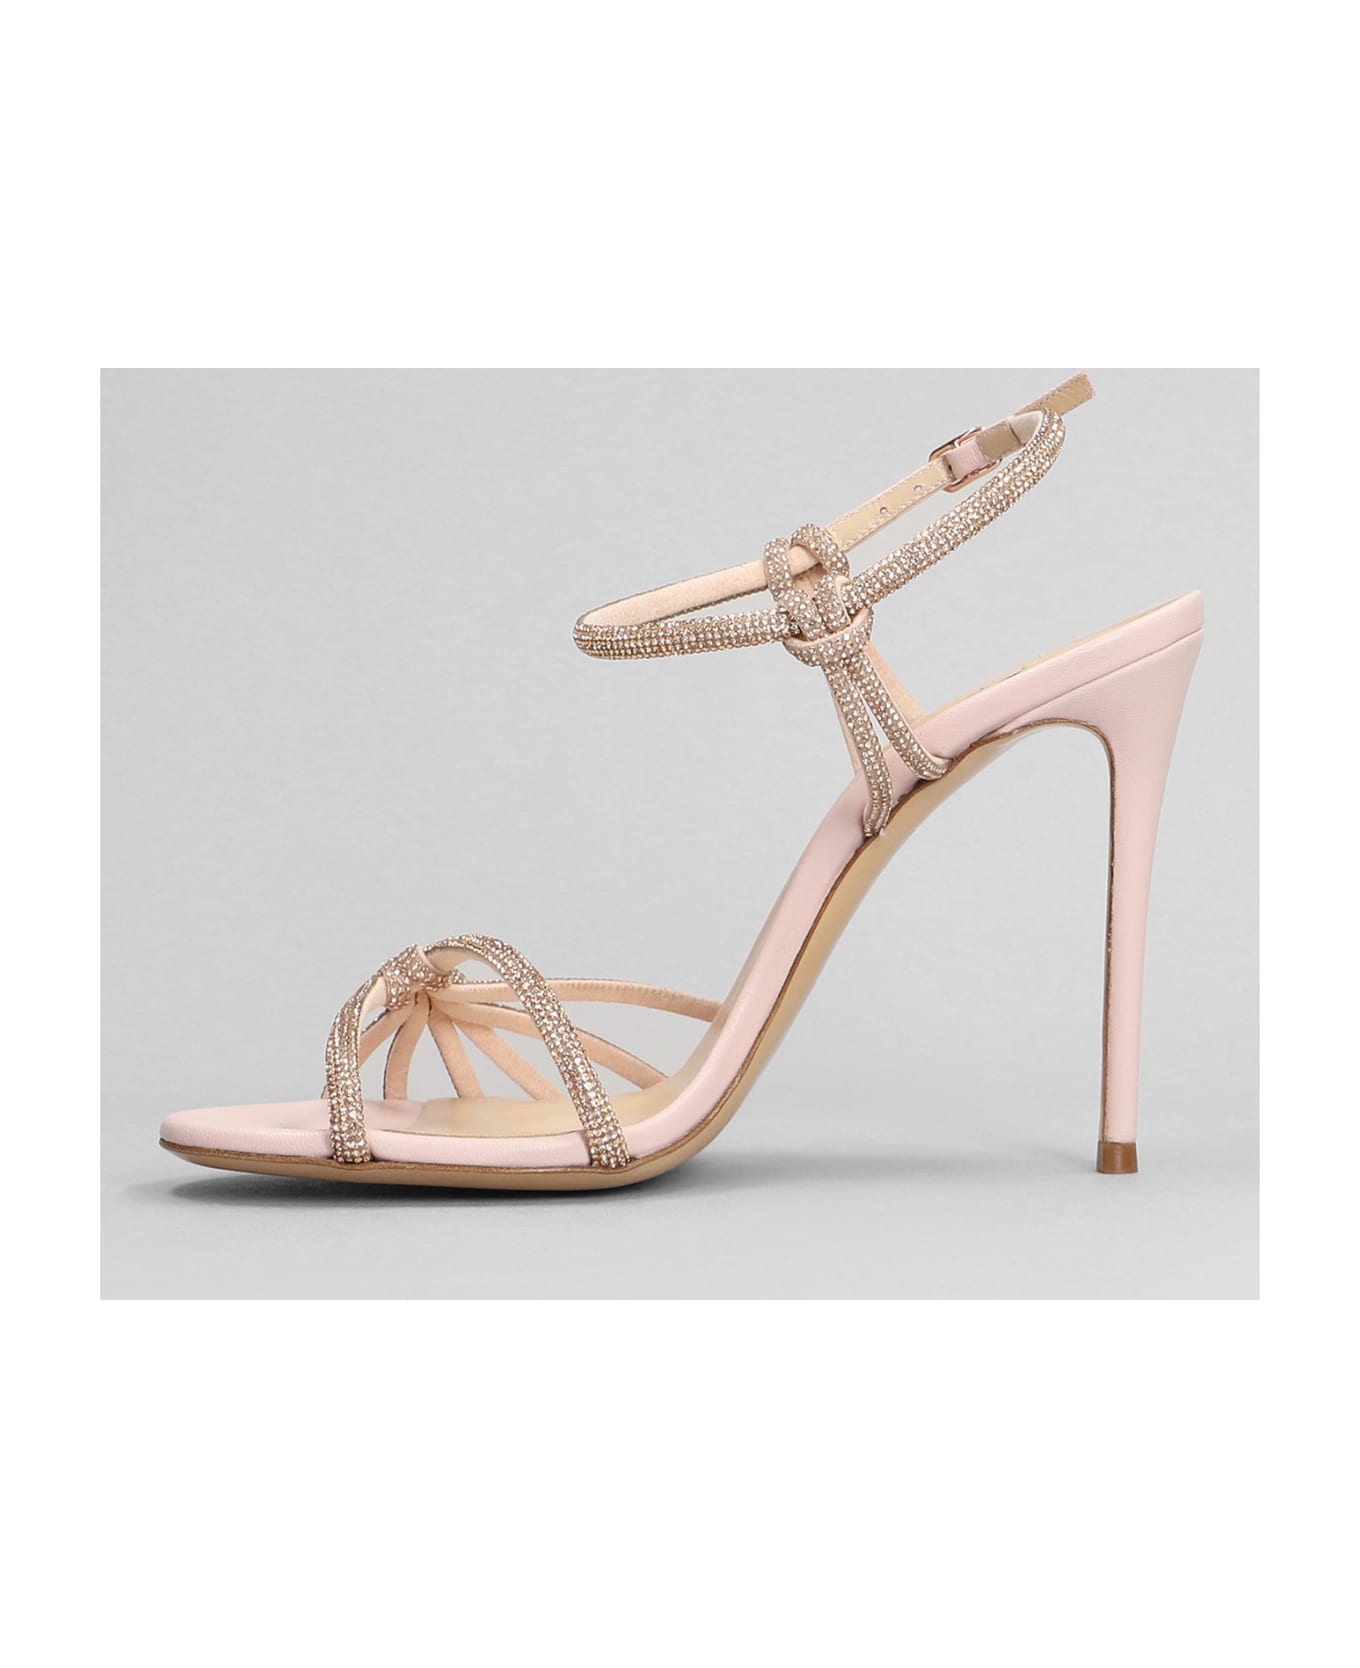 Casadei Sandals In Rose-pink Leather - rose-pink